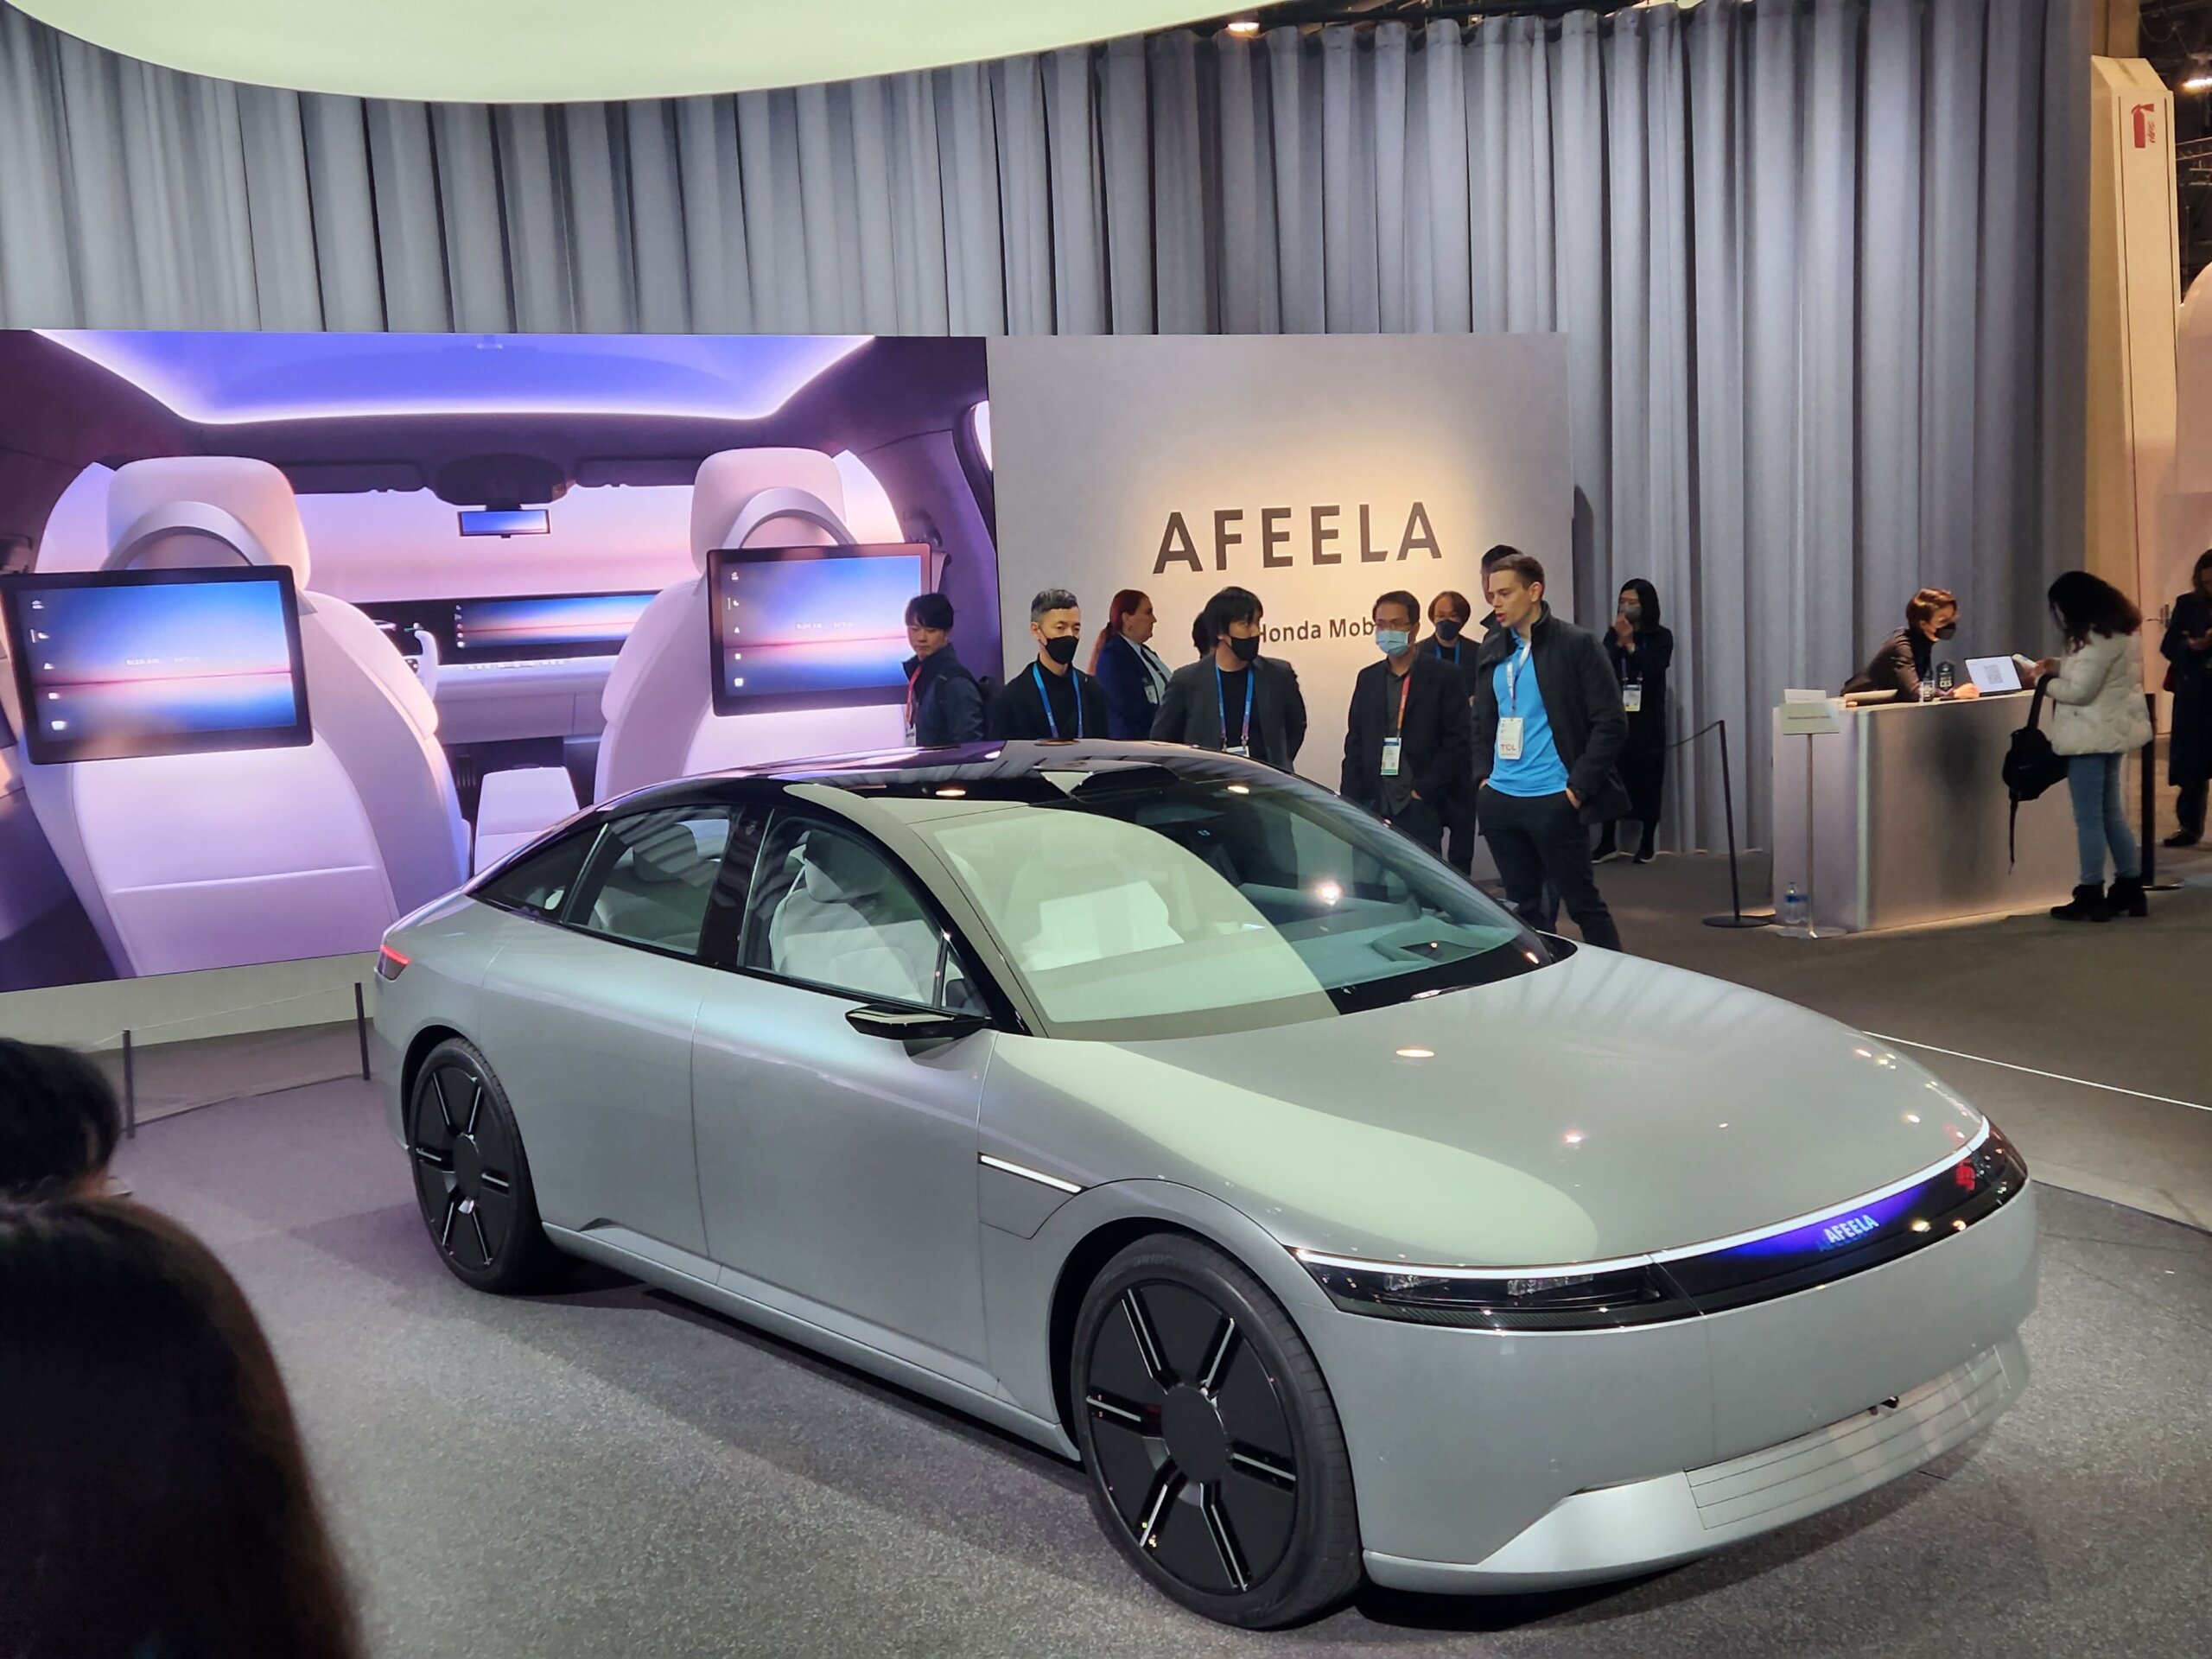 Electric vehicles at CES give a peek at the future of batterydriven